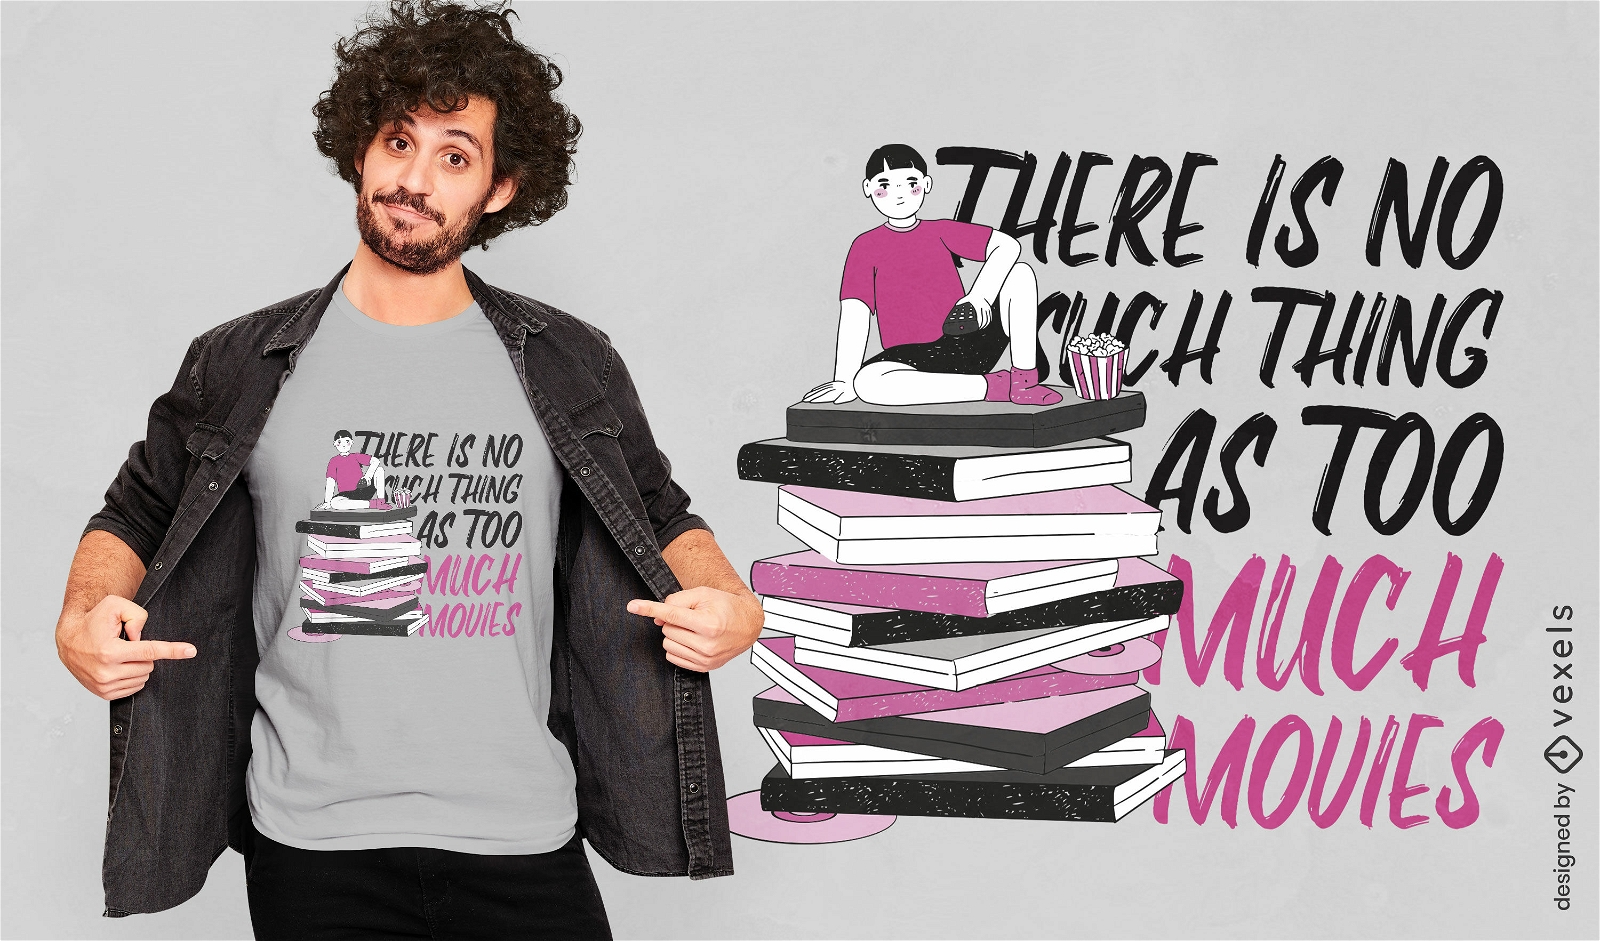 Too much movies quote t-shirt design